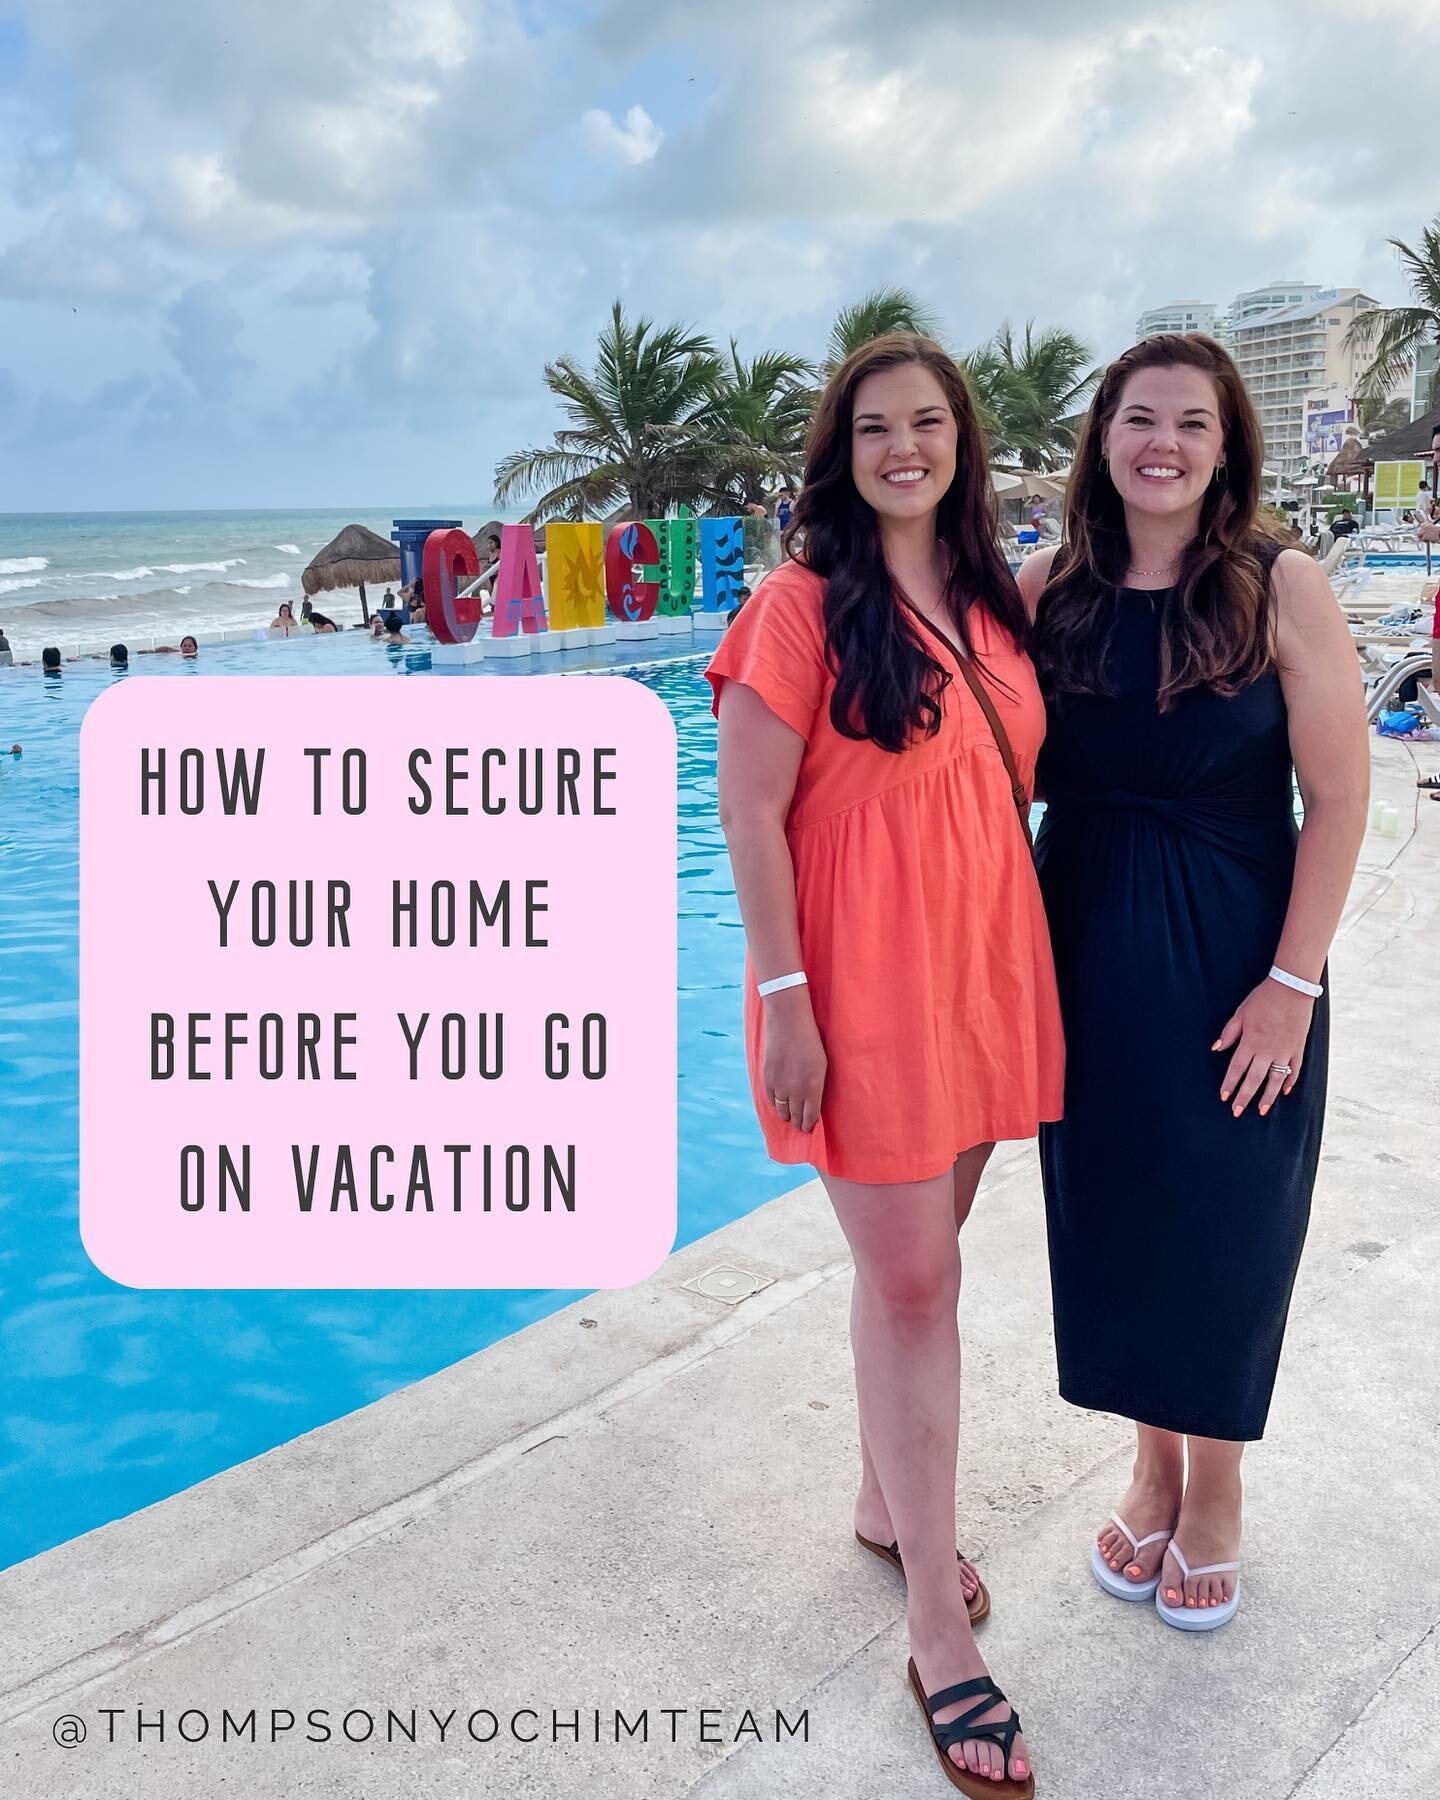 Sunscreen? Check!
Suitcase? Check!
Dog Sitter lined up? Check!
Home Security System set up? Ummmm...

It's hard to truly relax while you're away if you aren't 100% sure your home is safe and secure! Here are a few ways to vacay-proof your home so you